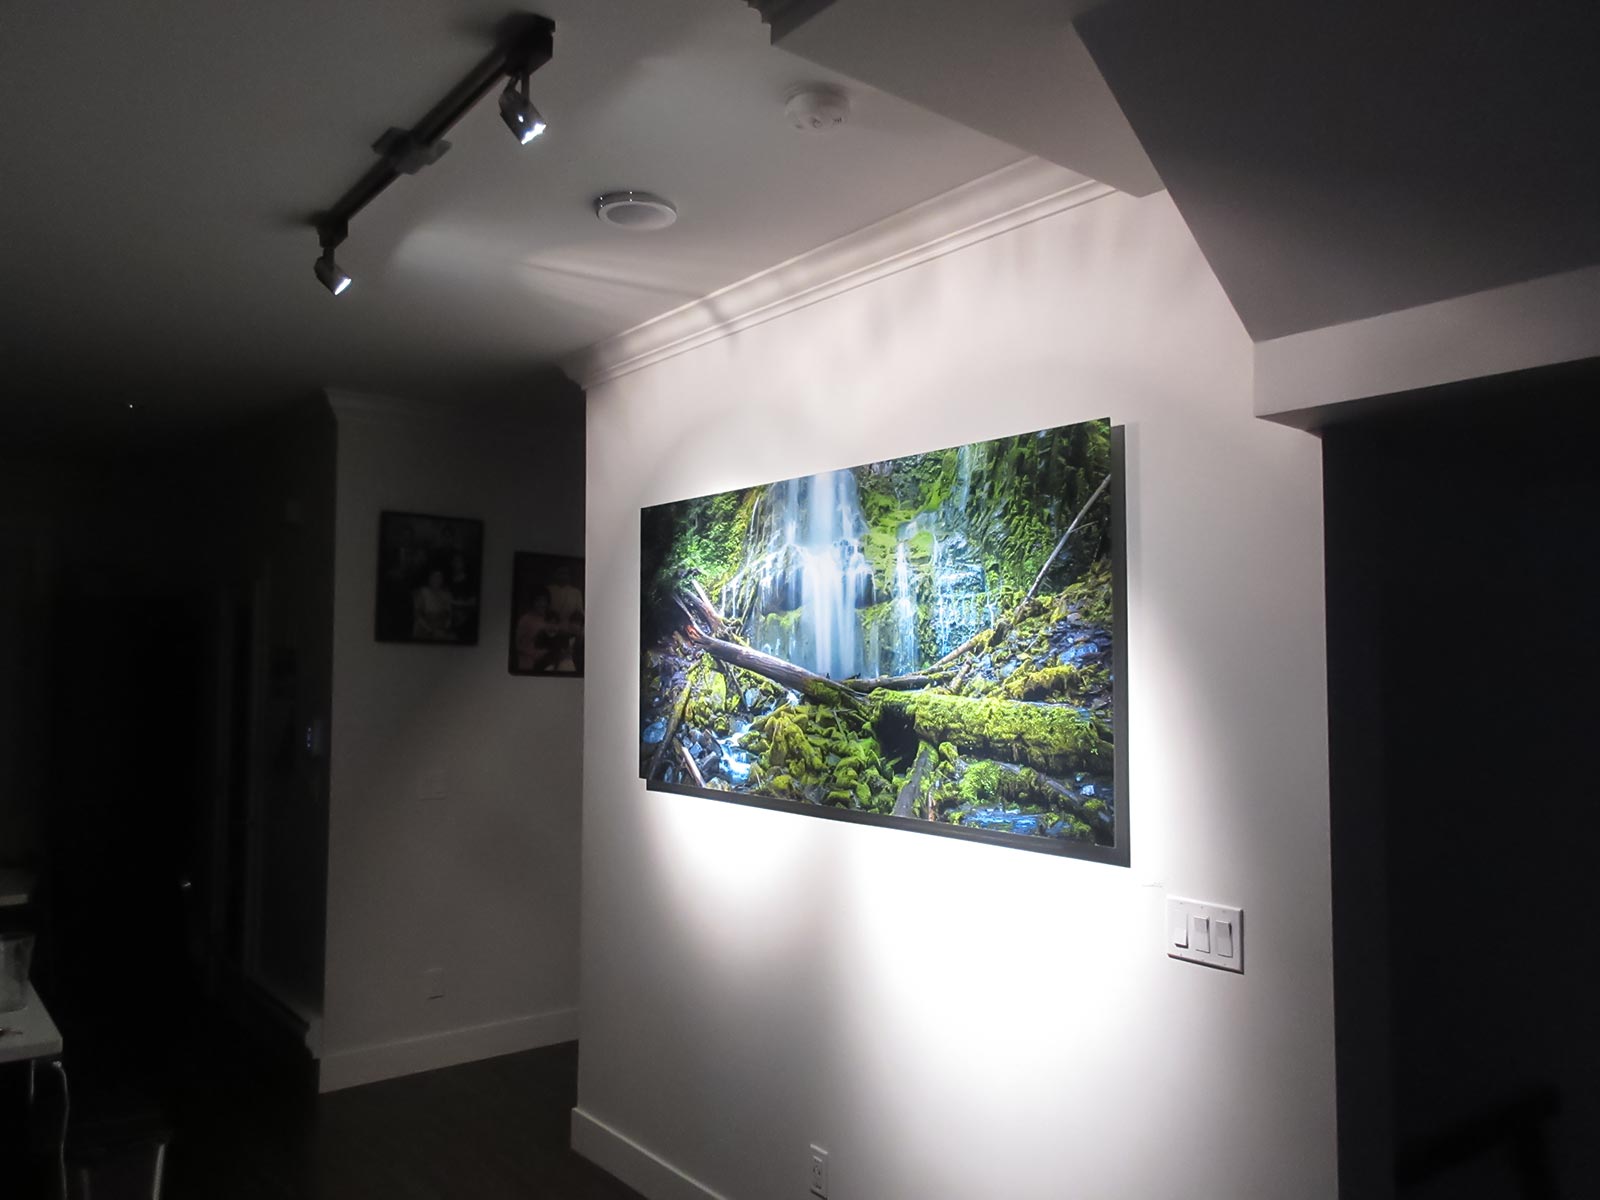 Whispering Green", a VAST photo by Tim Shields hanging on a residential home wall